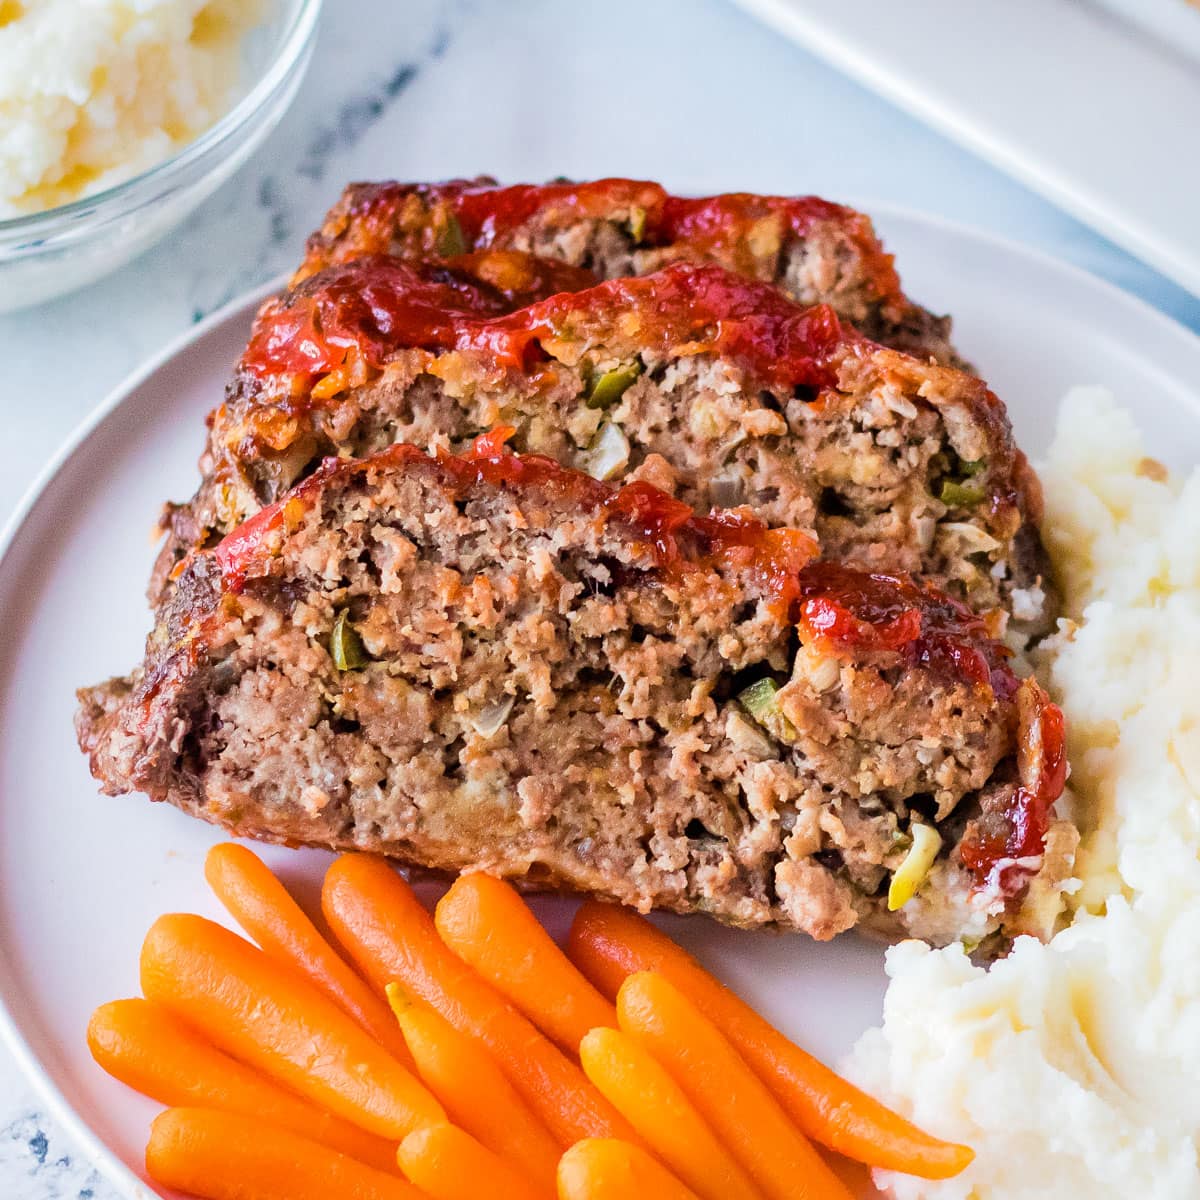 Two slices of meatloaf on a plate with mashed potatoes and carrots.